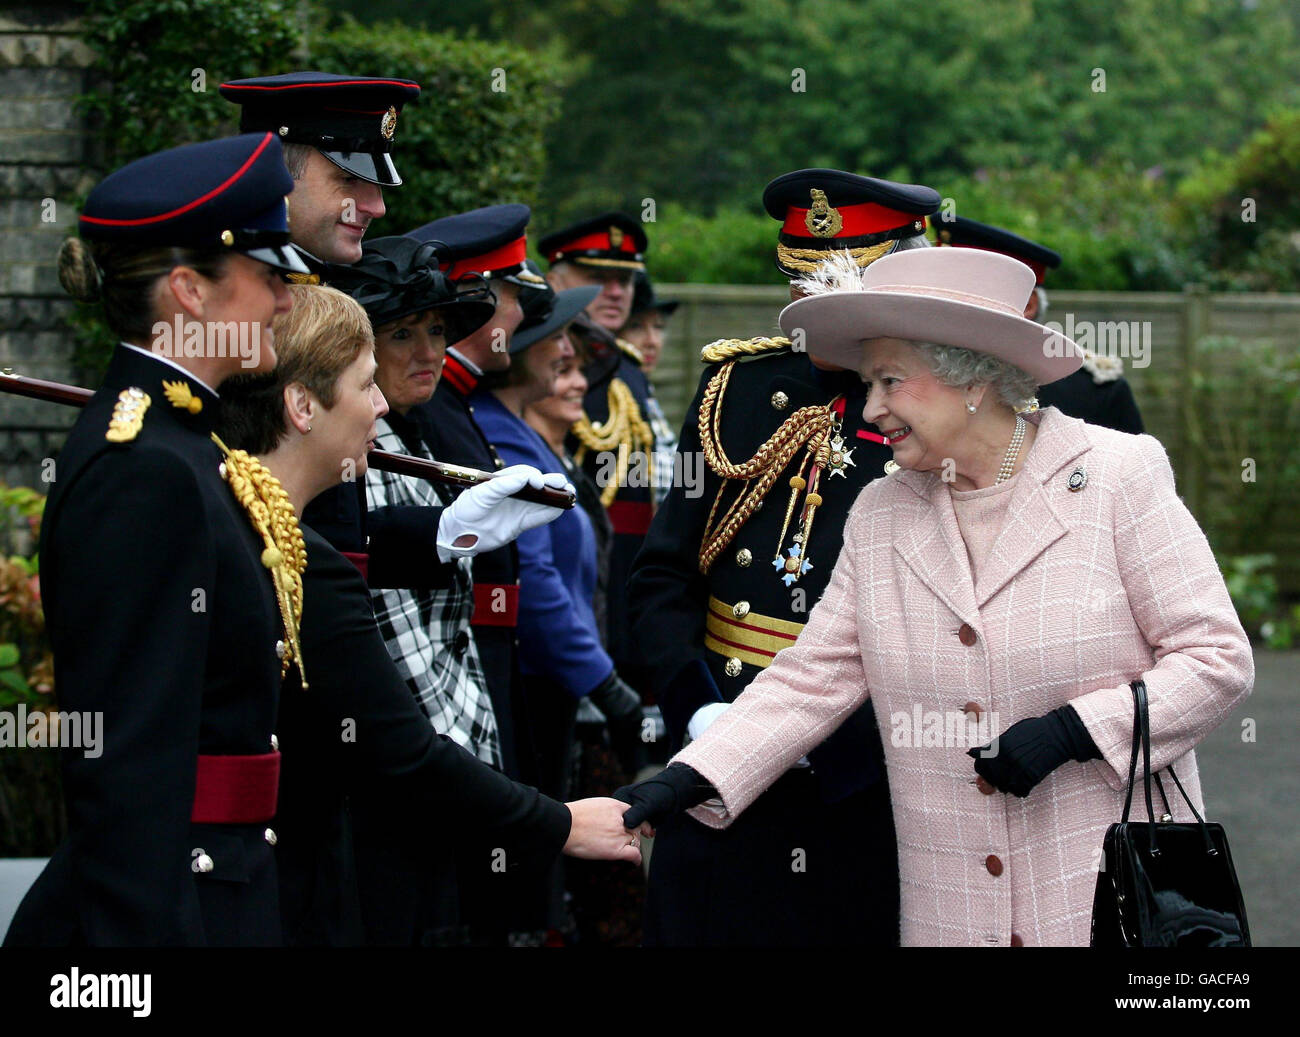 Britain's Queen Elizabeth II greets the welcoming party during a visit to the Corps of Royal Engineers at Brompton Barracks, Chatham, Kent. Stock Photo